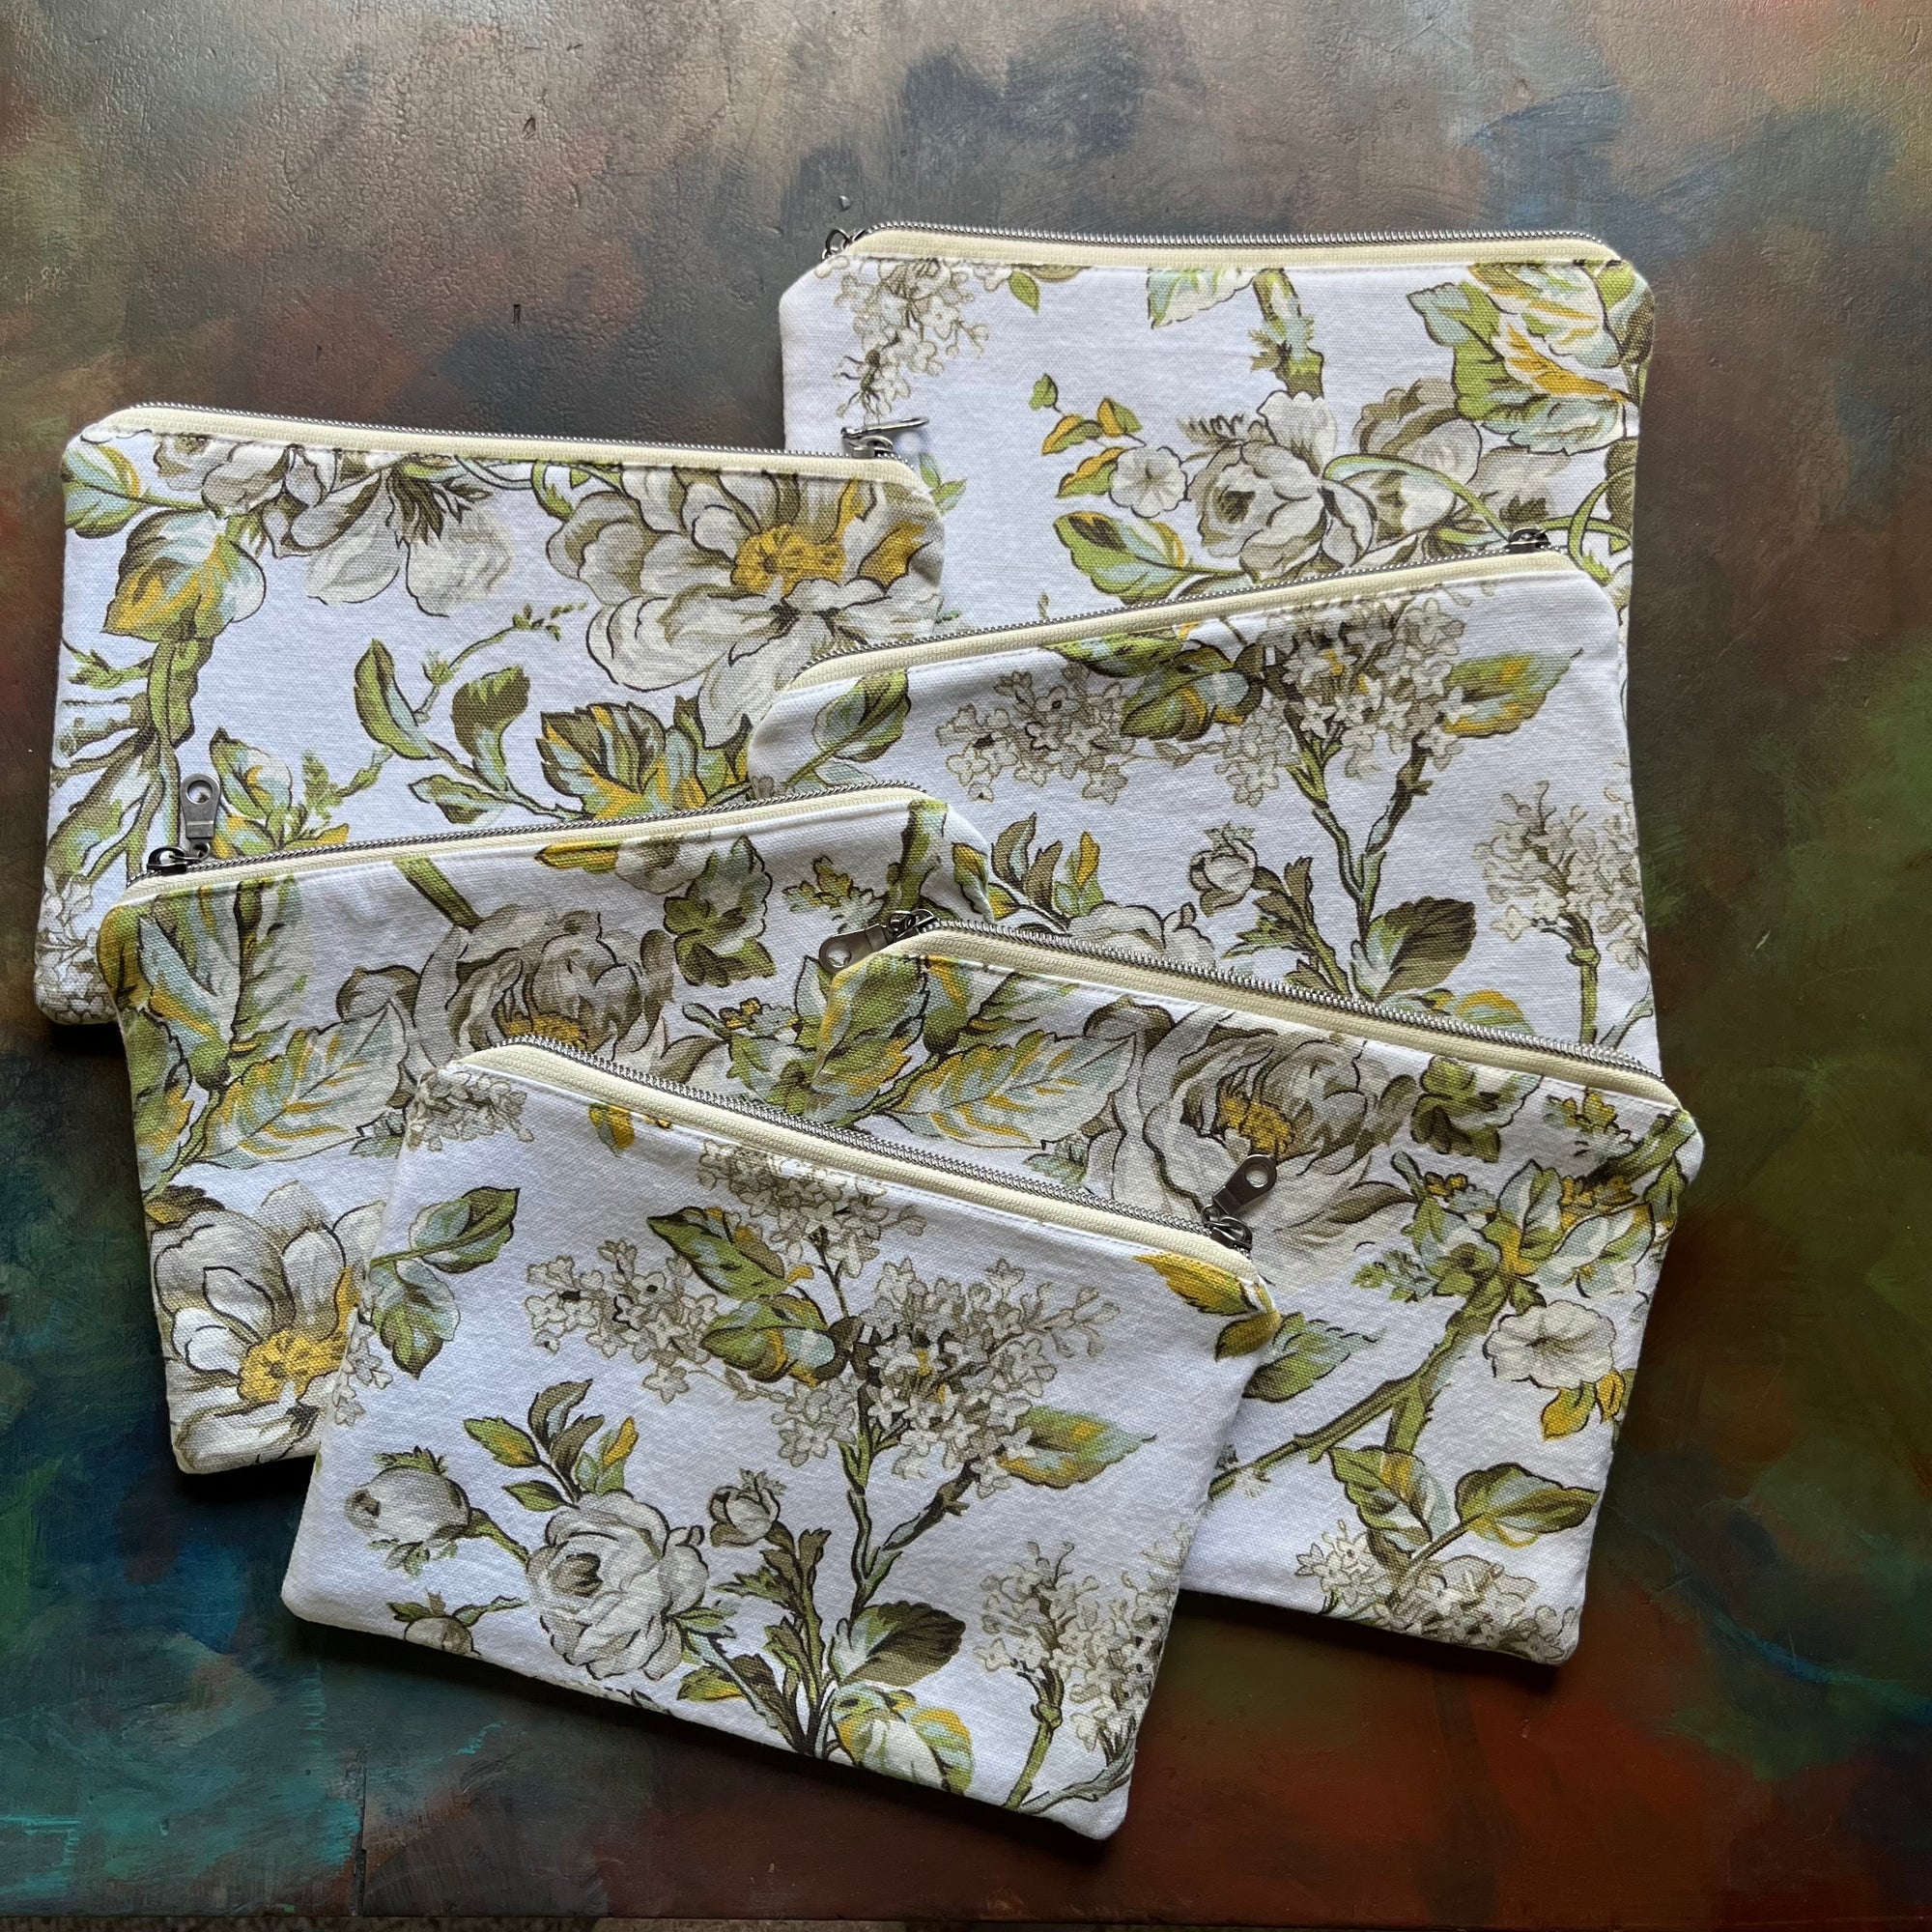 Vintage White Rose Floral Tablecloth Upcycled into Oversized Pencil Case - Small Clutch